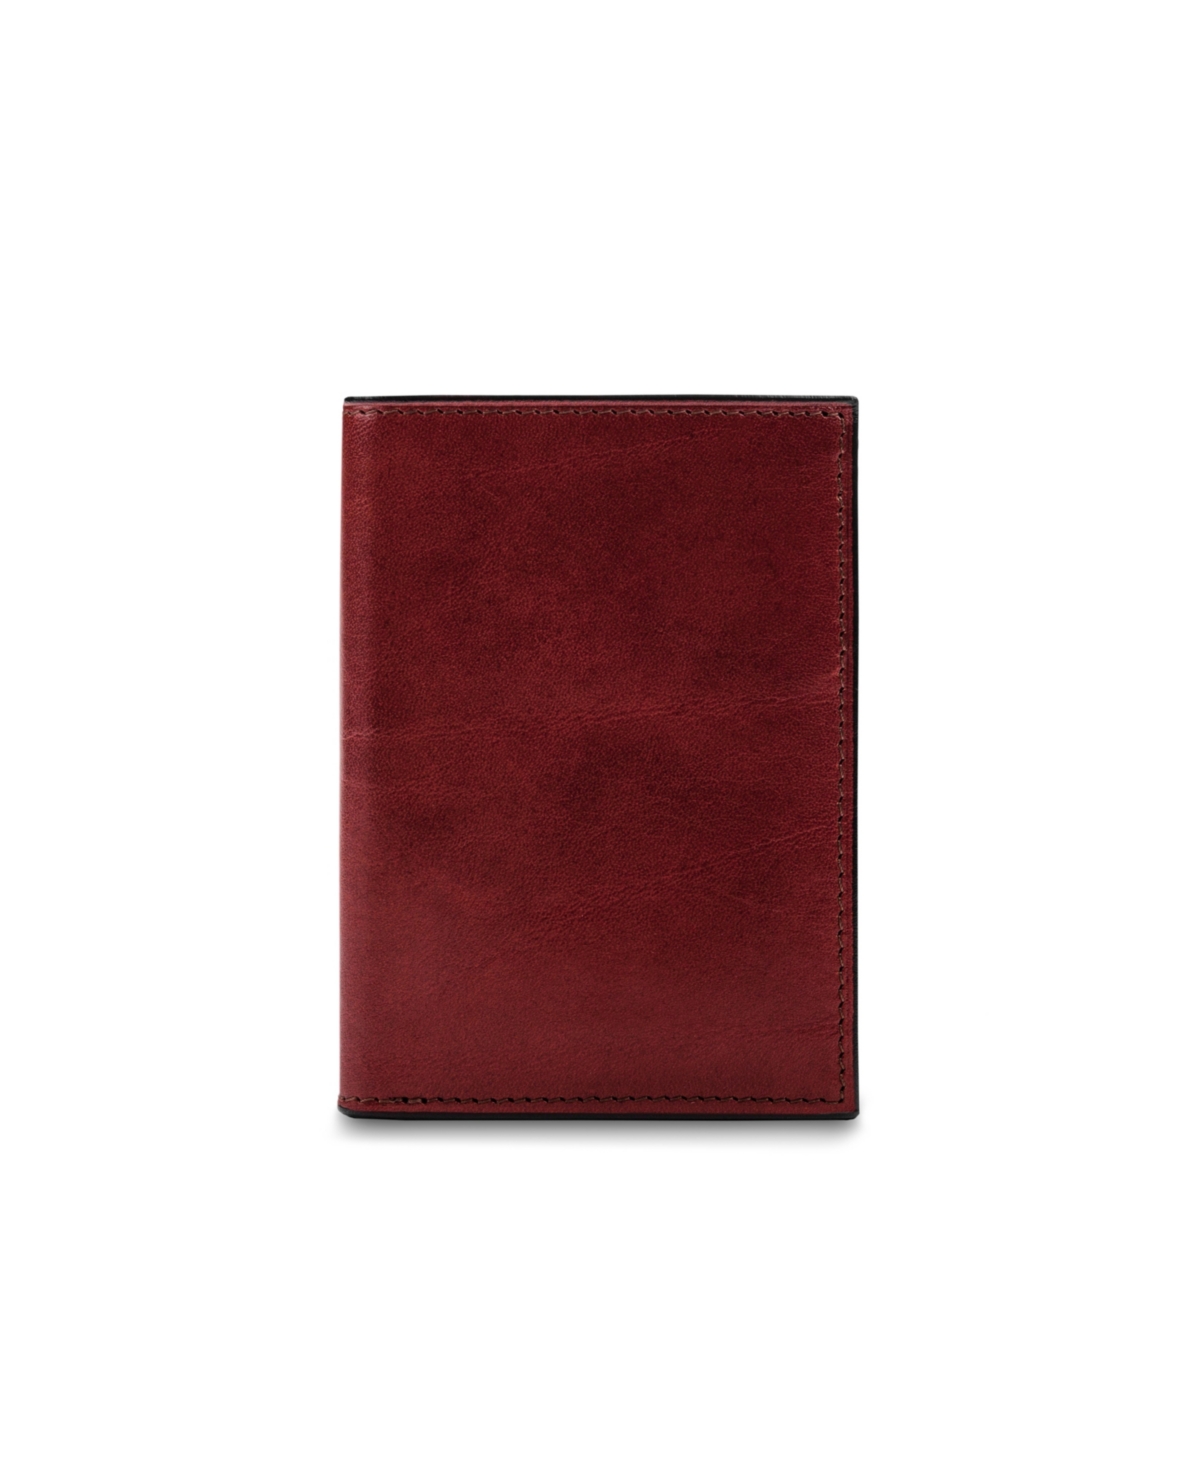 Men's Old Leather Collection - Passport Case - Dark brown leather